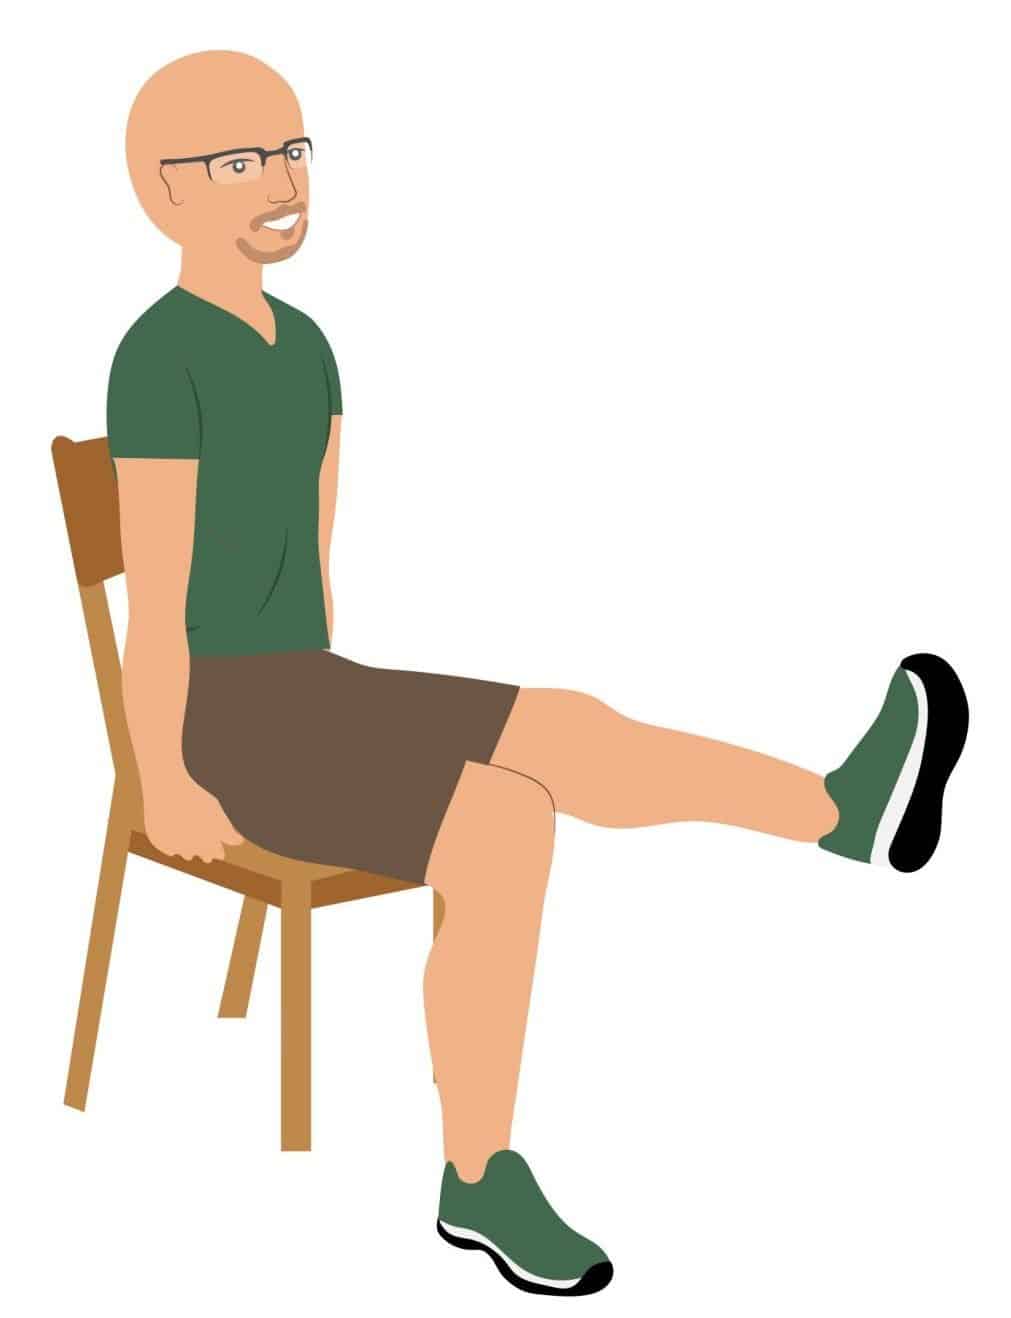 knee extension exercise help increase strength in senior